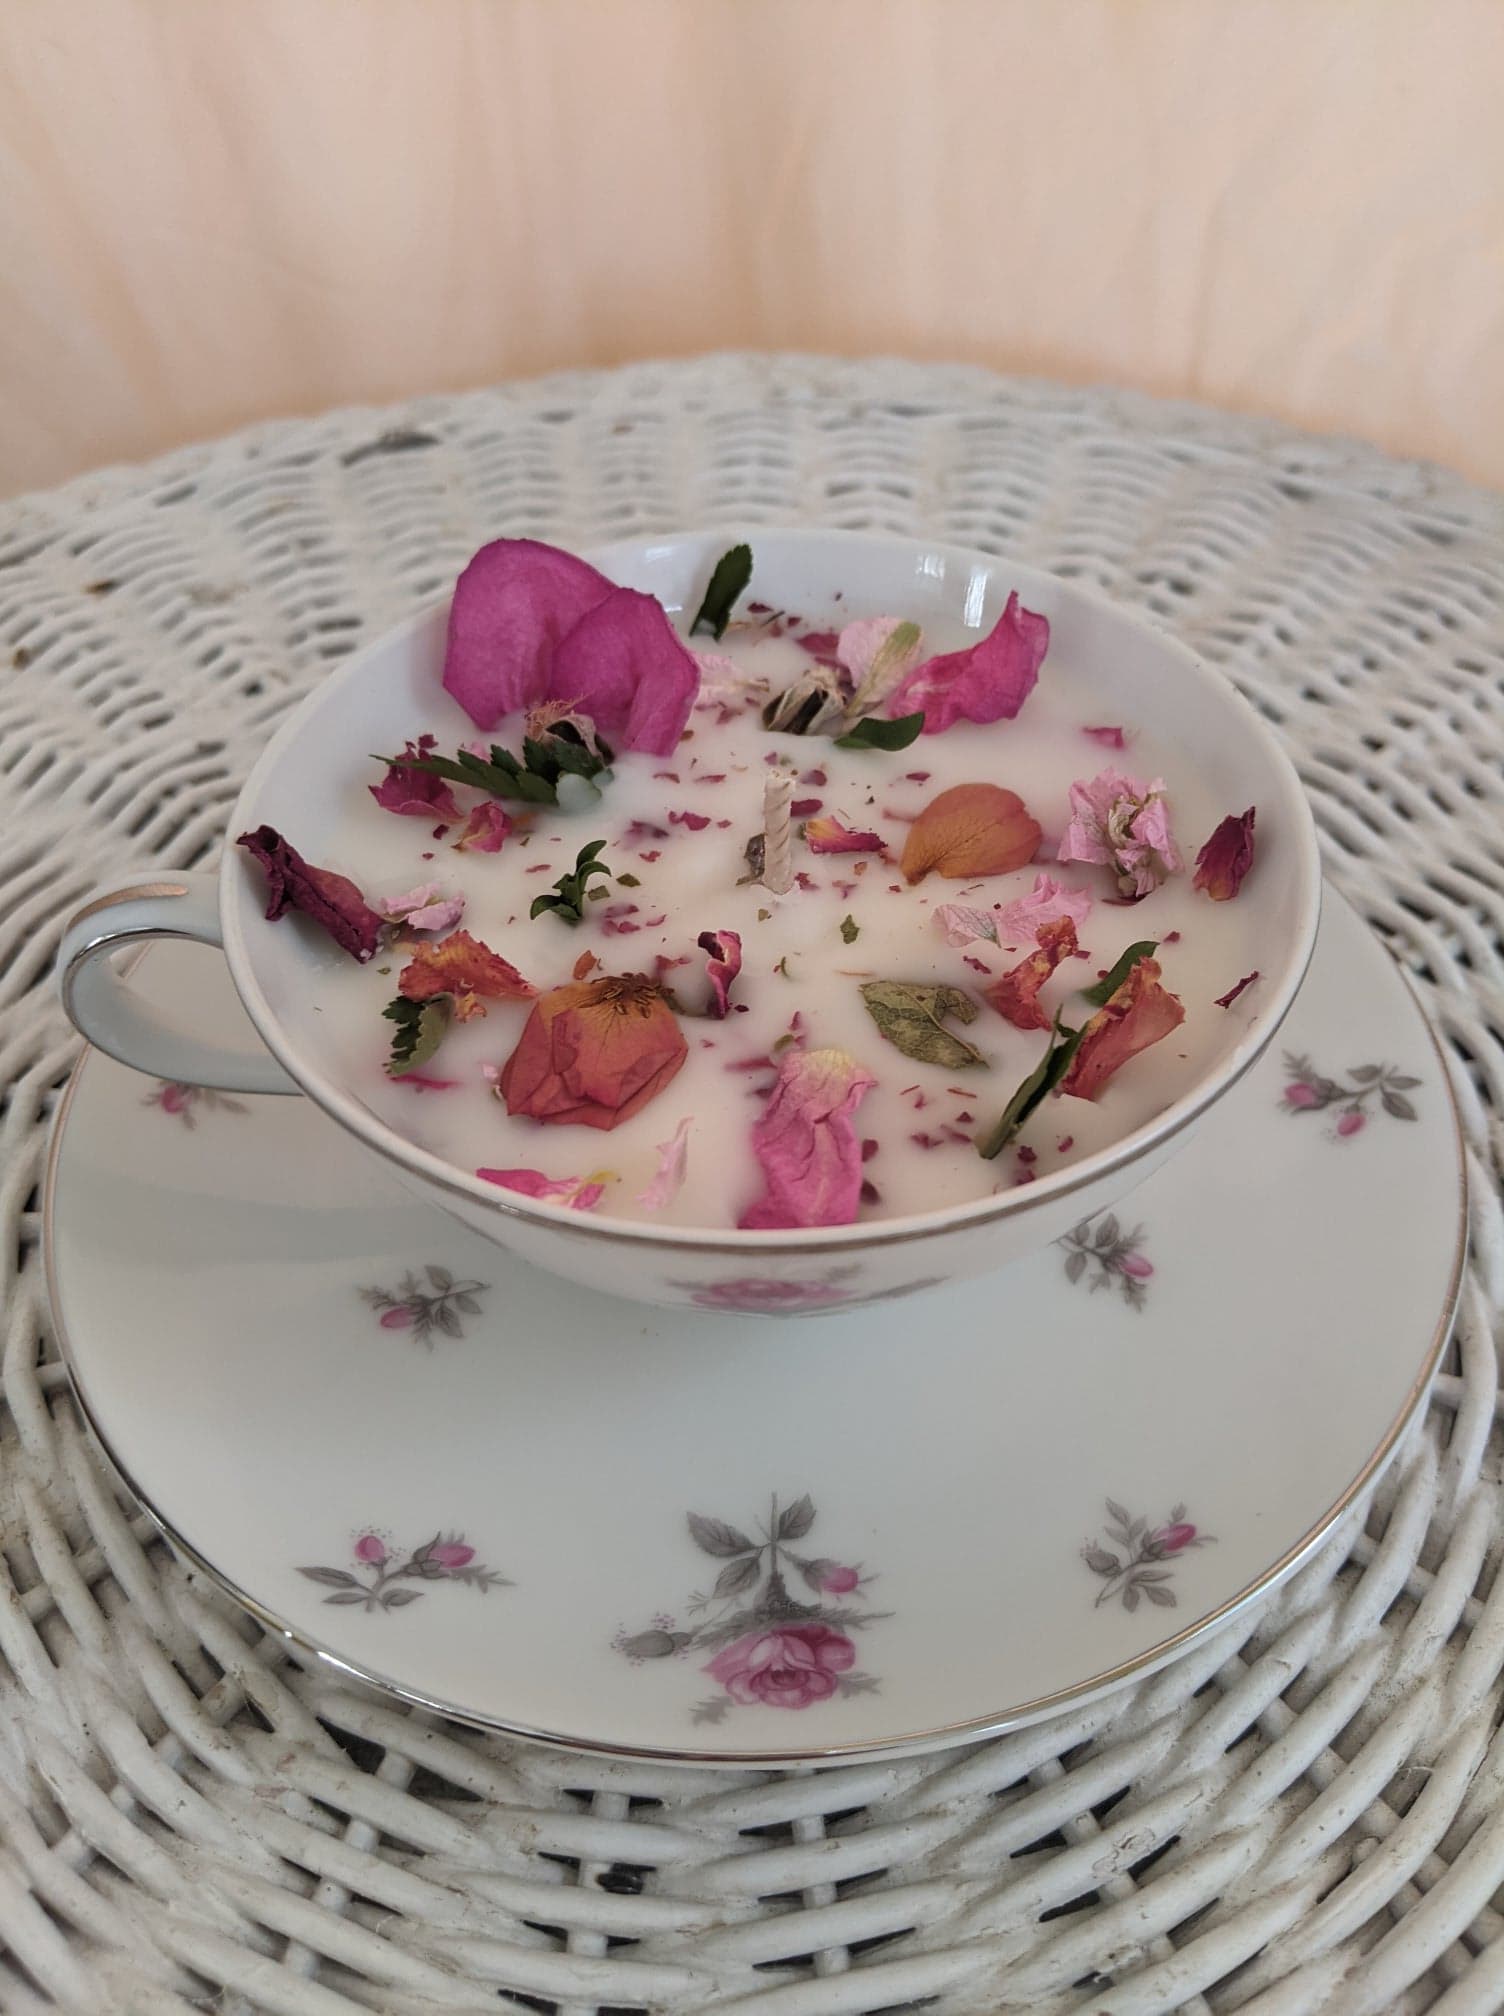 Small-Size "Specialty" Teacup Candle (Example Only)